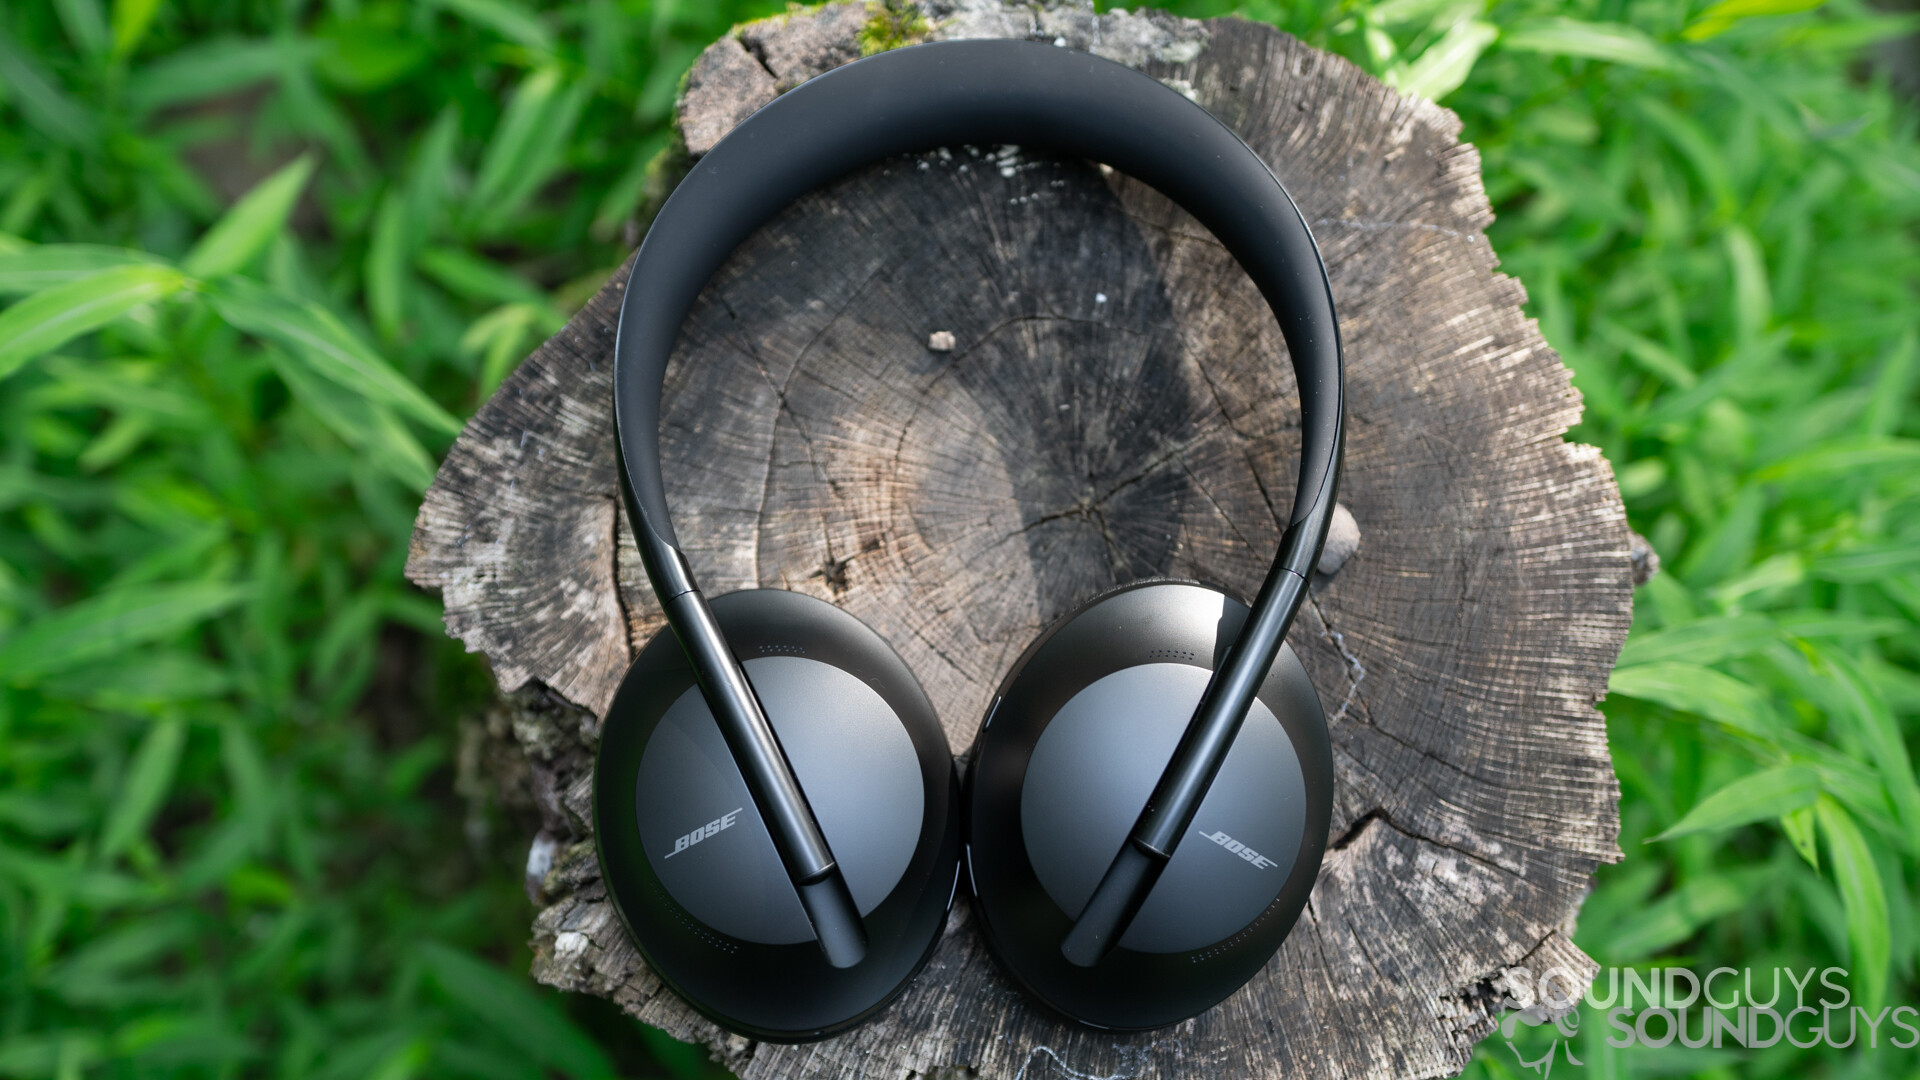 Bose Noise Canceling 700 headphones sitting on a tree trunk surrounded by grass outside.